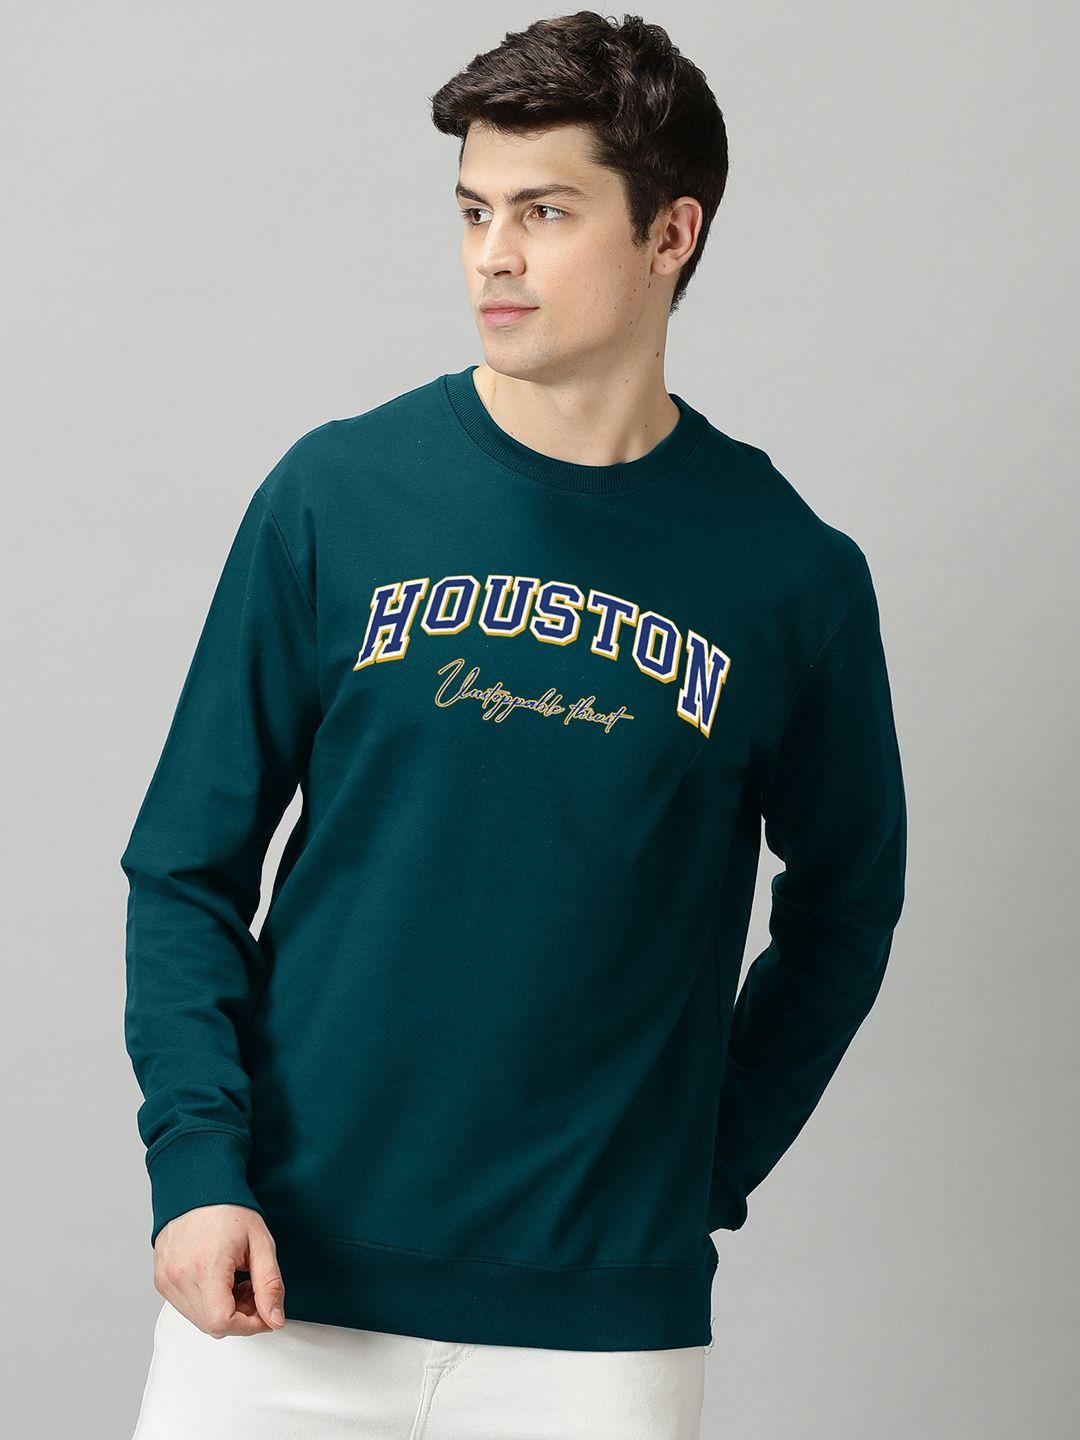 the hollander typography printed long sleeves t-shirt